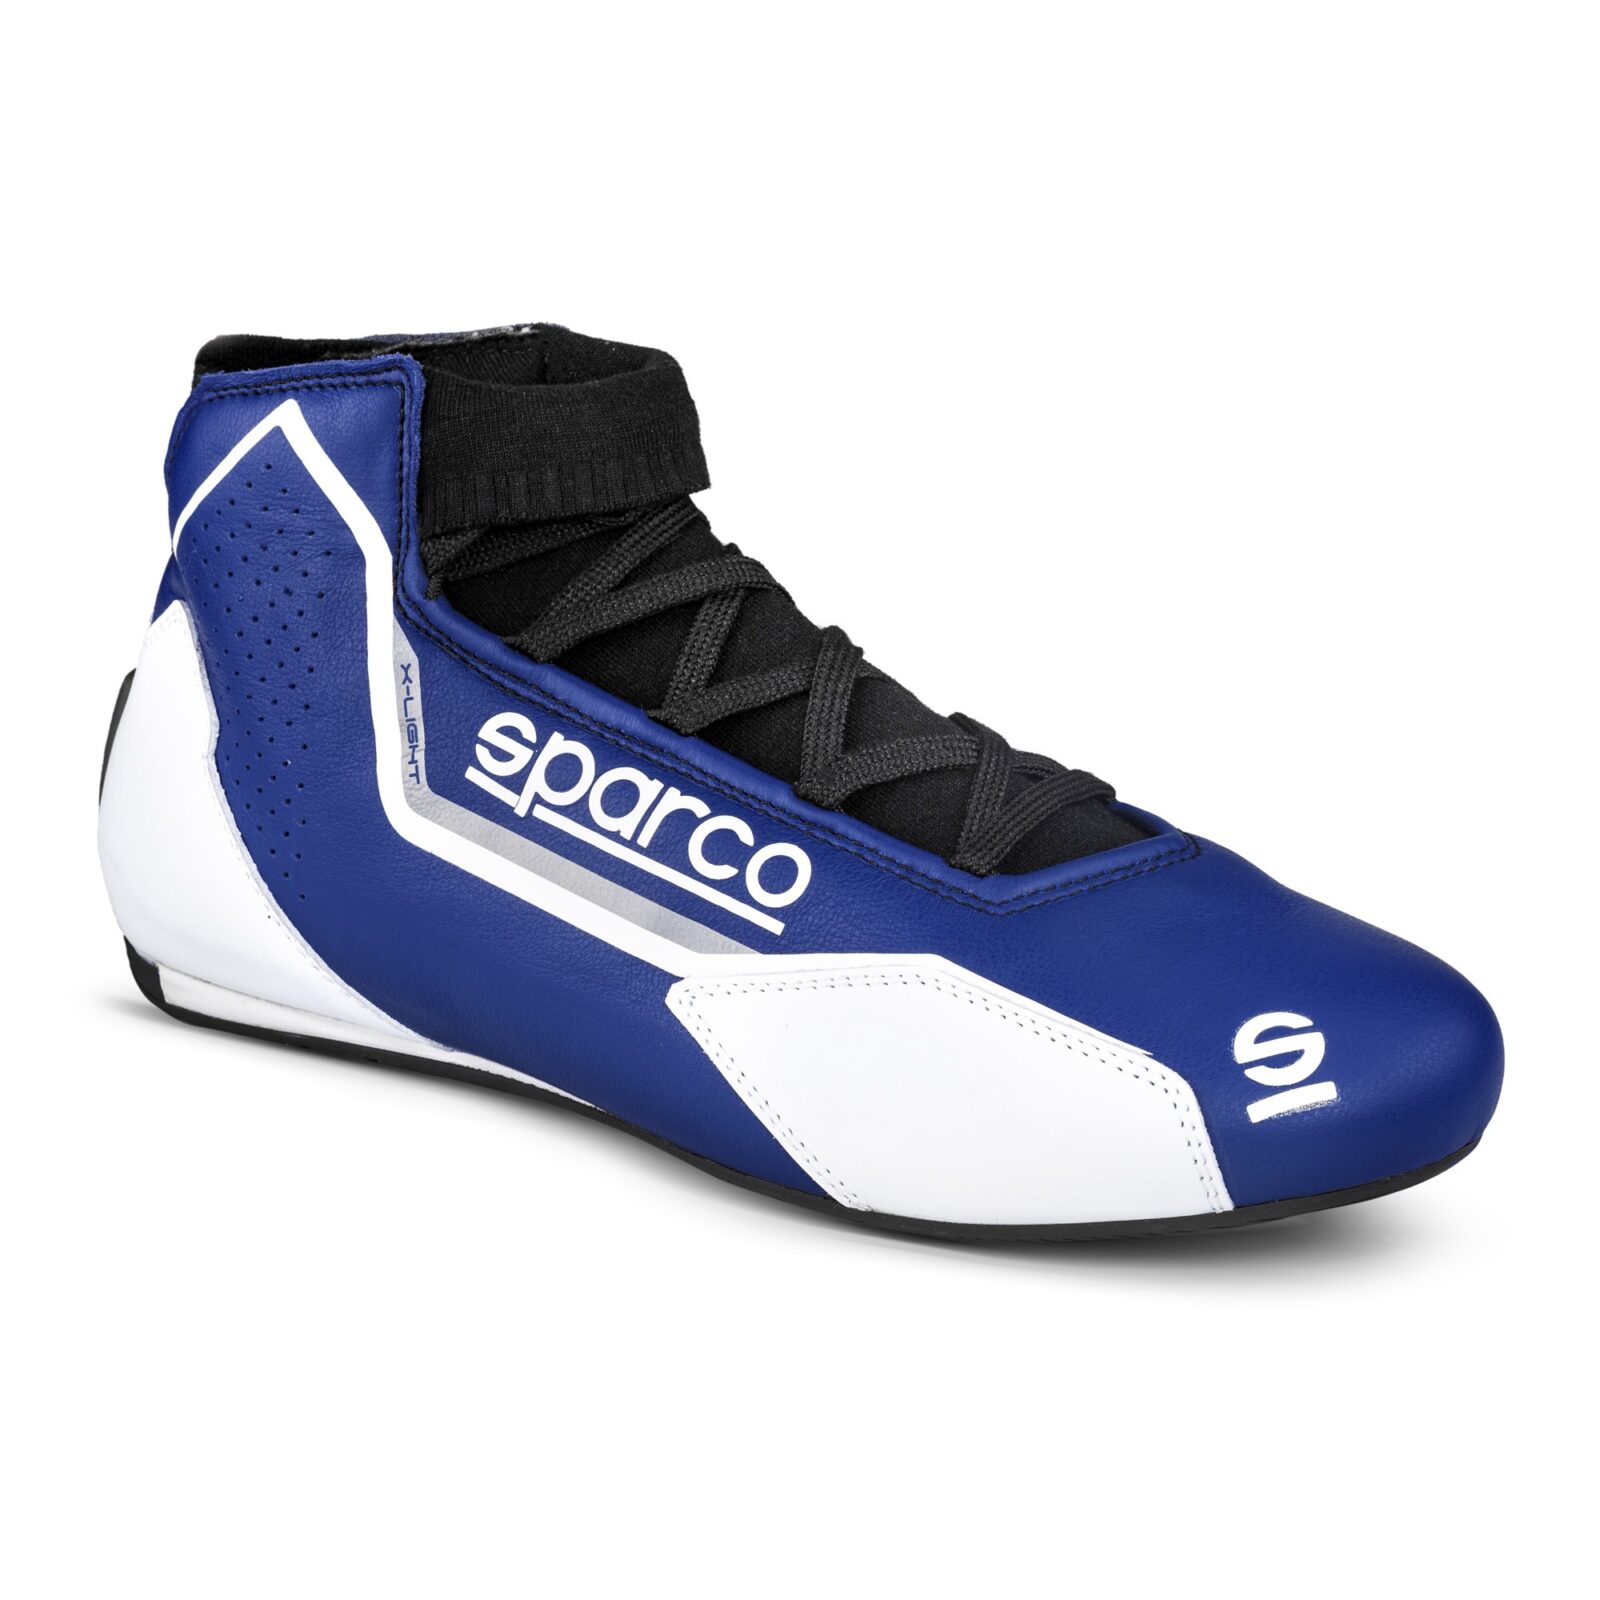 Sparco Apex RB-7 Racing Shoes 00001261 Size: 41, Blue/Grey 